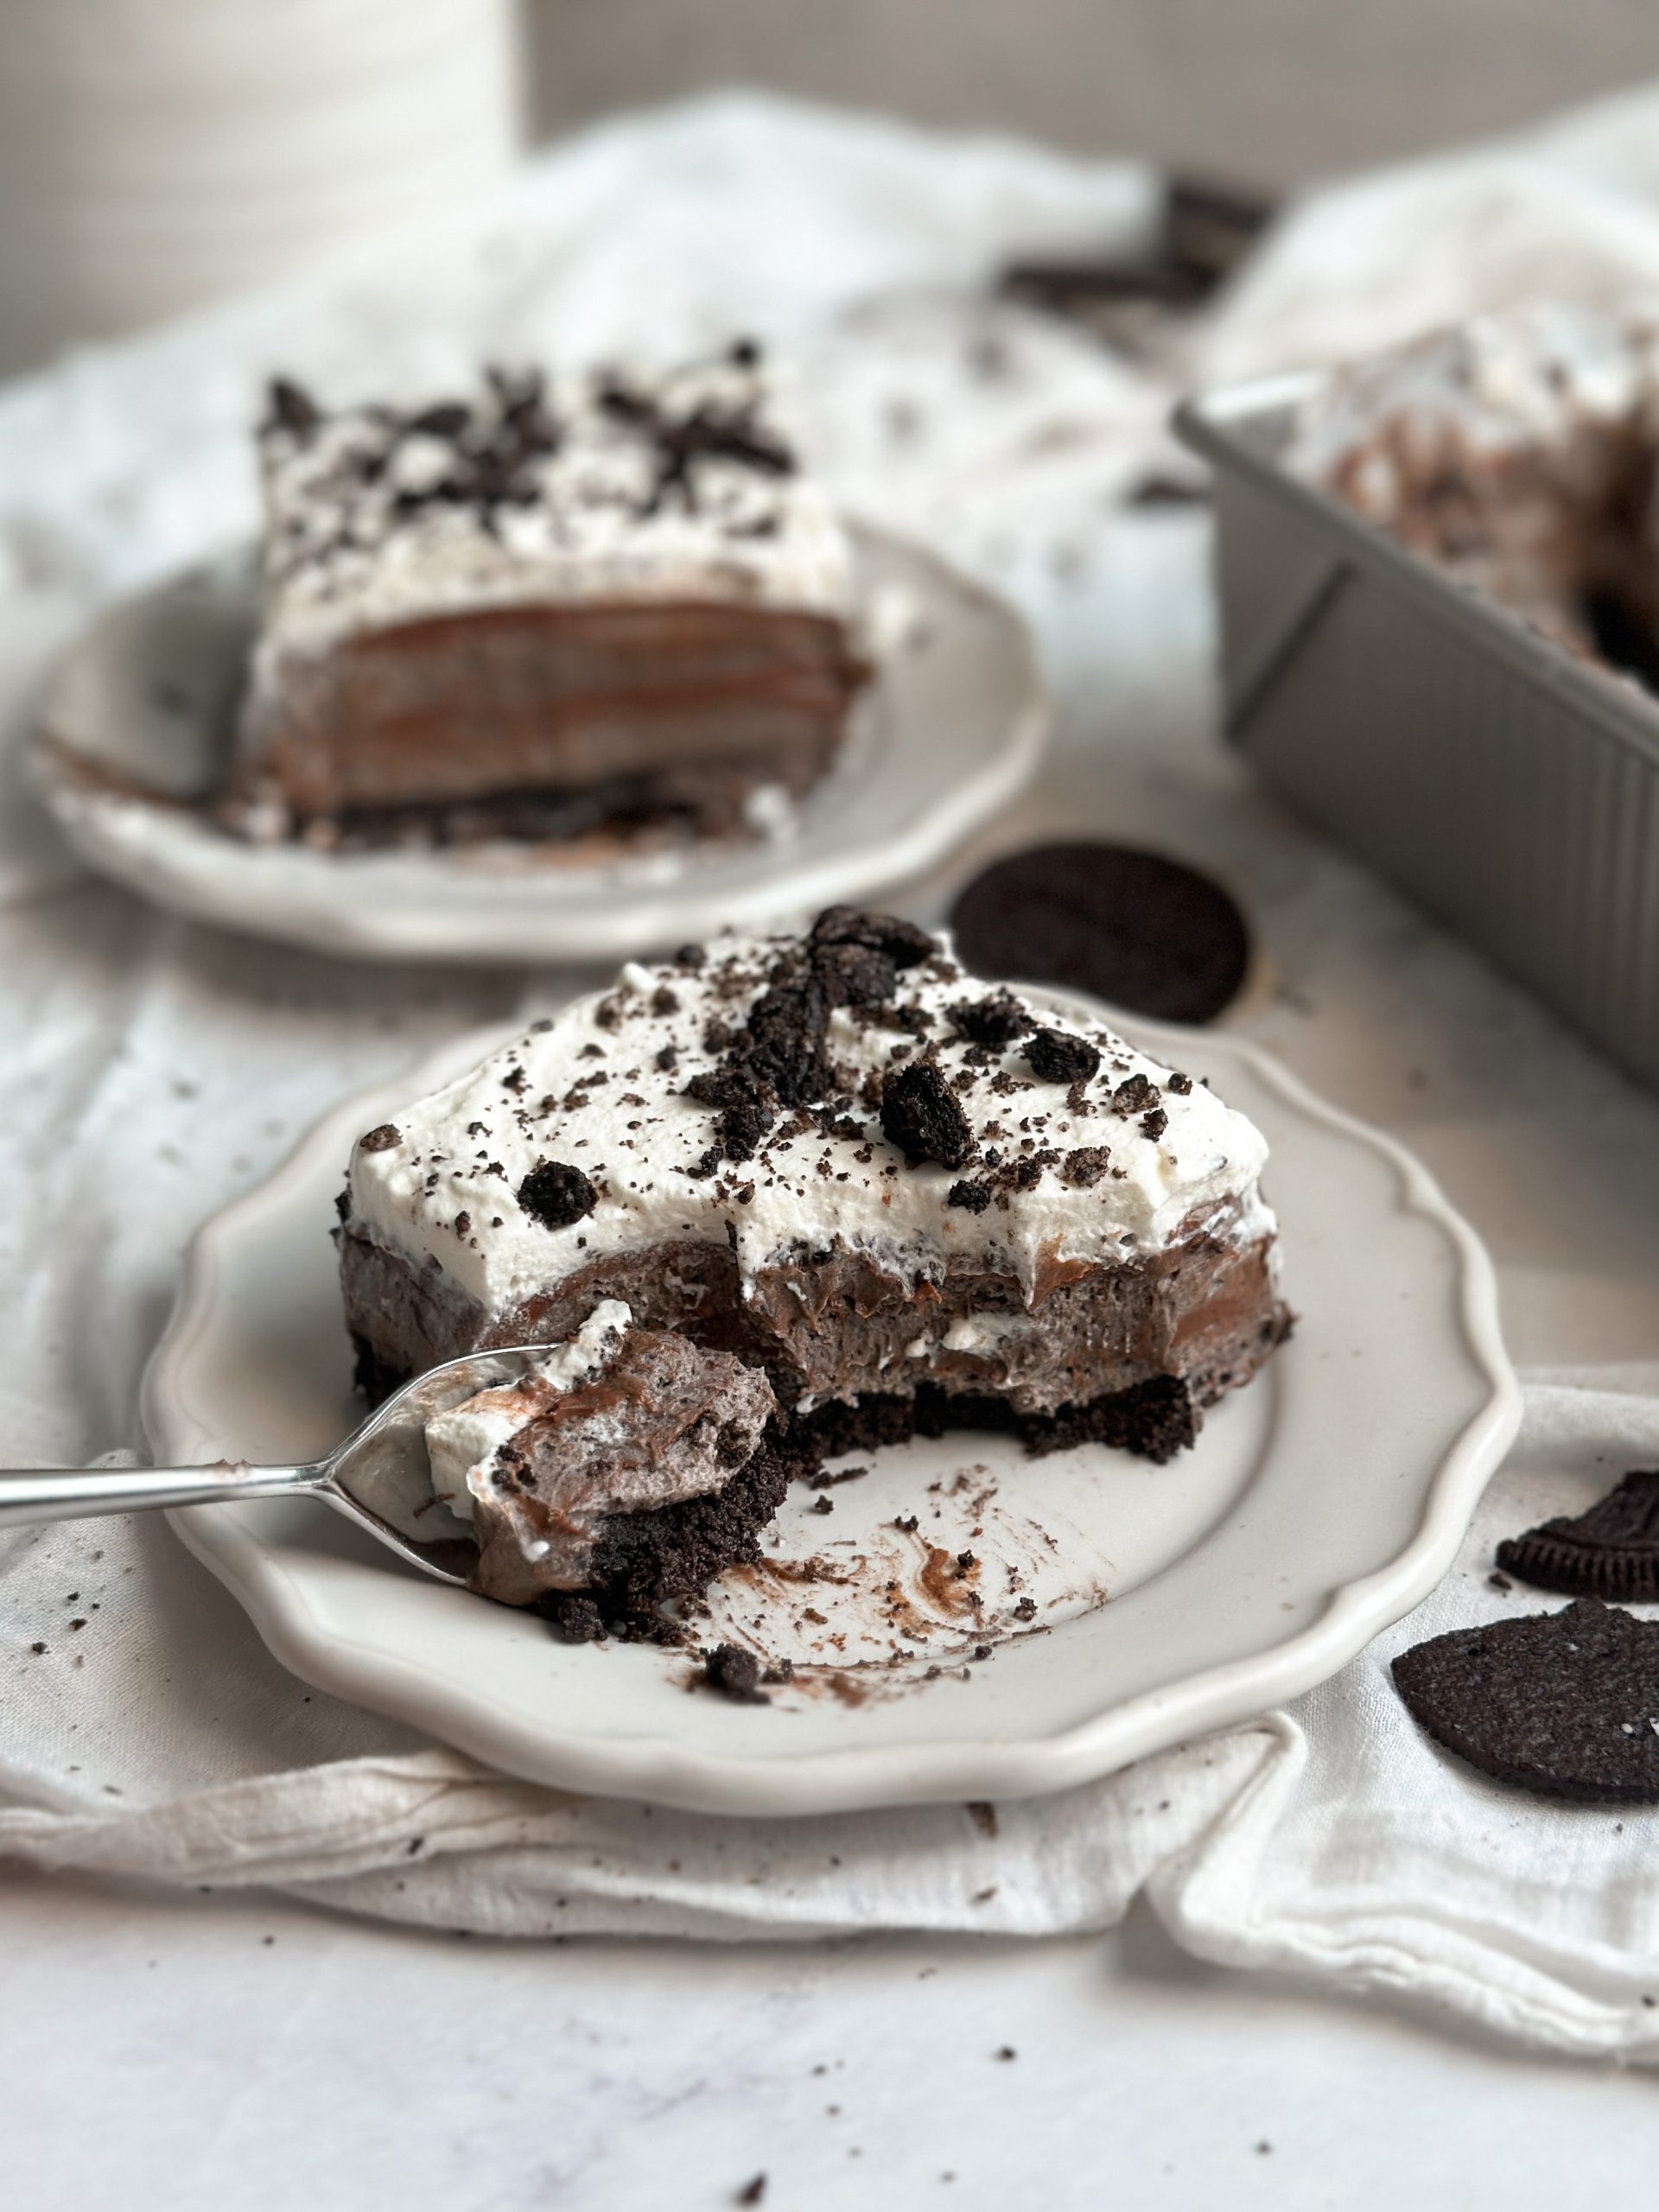 a slice of no bake cookies and cream mousse cake on a small plate with a crust, layers of mousse and ganache, and a spoon is taking out a bite from the cake. another plate in background